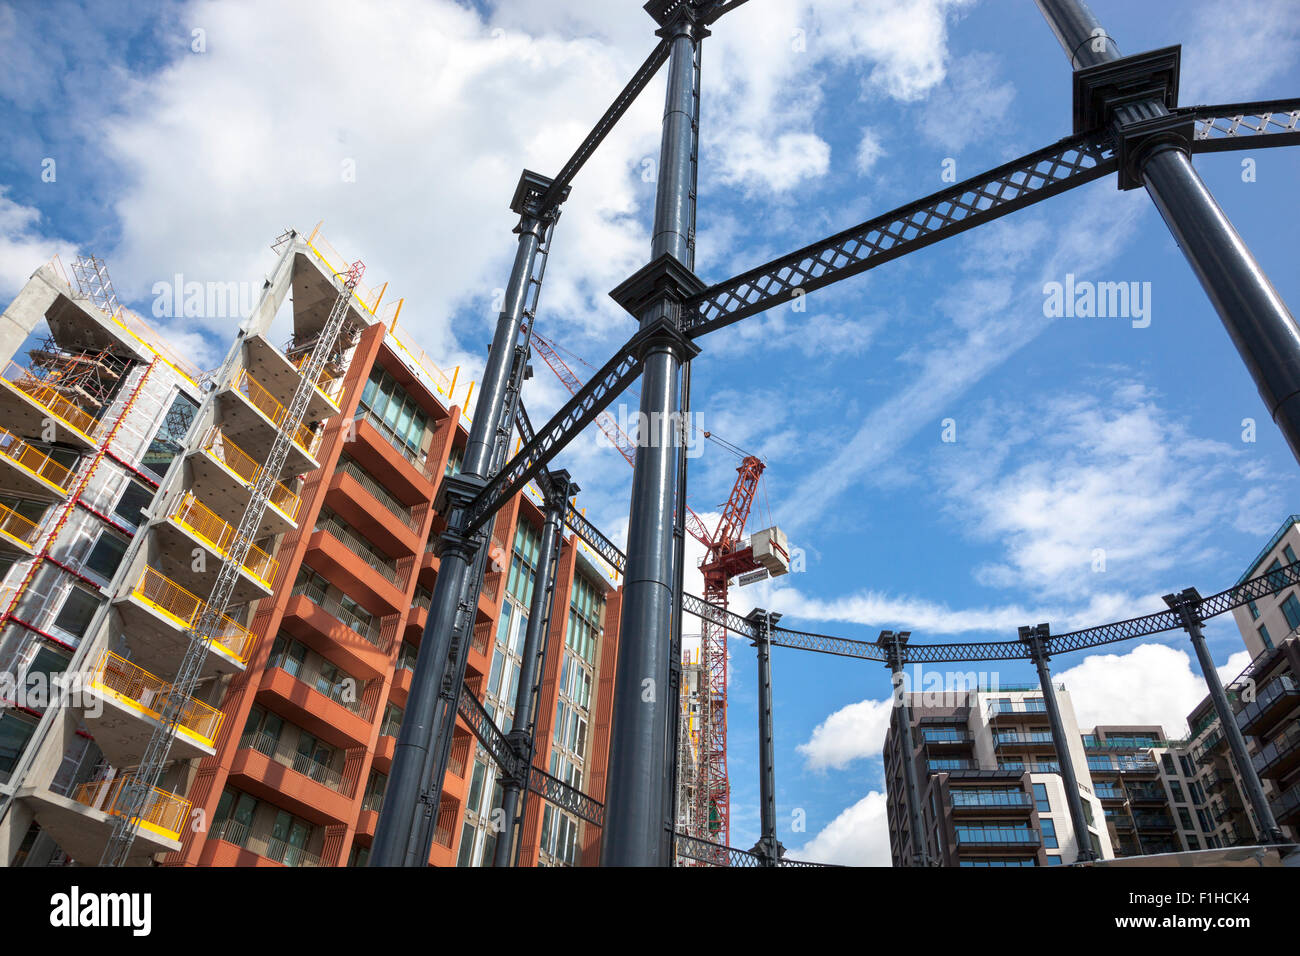 29th August 2015 - Ongoing construction of new Gasholders London residential towers at Kings Cross Stock Photo